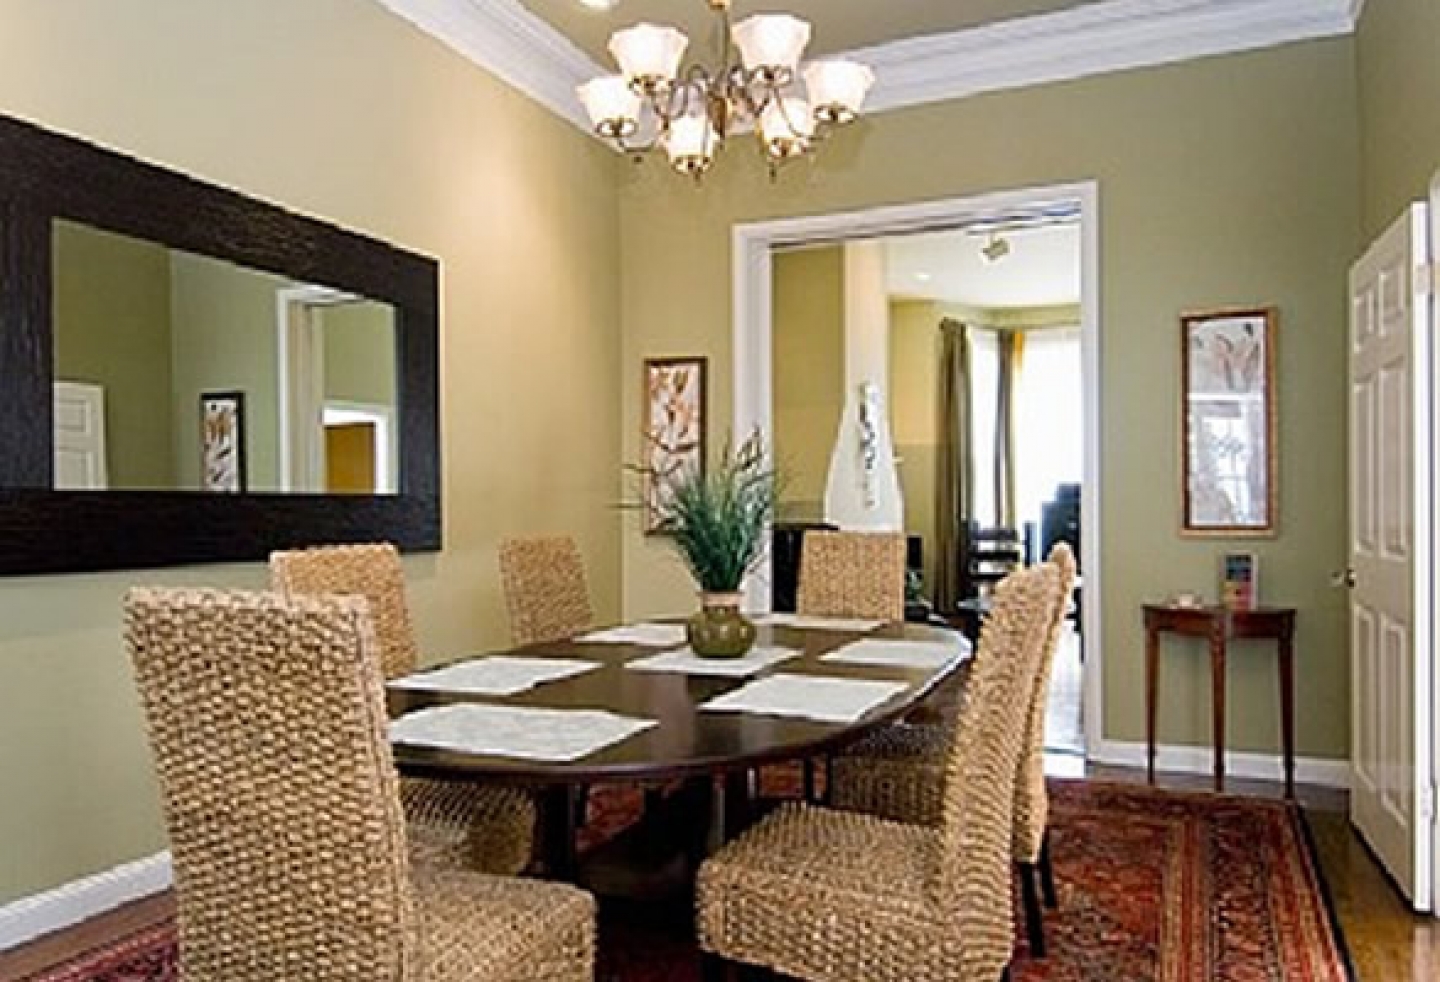 dining room pictures ideas photo - 2